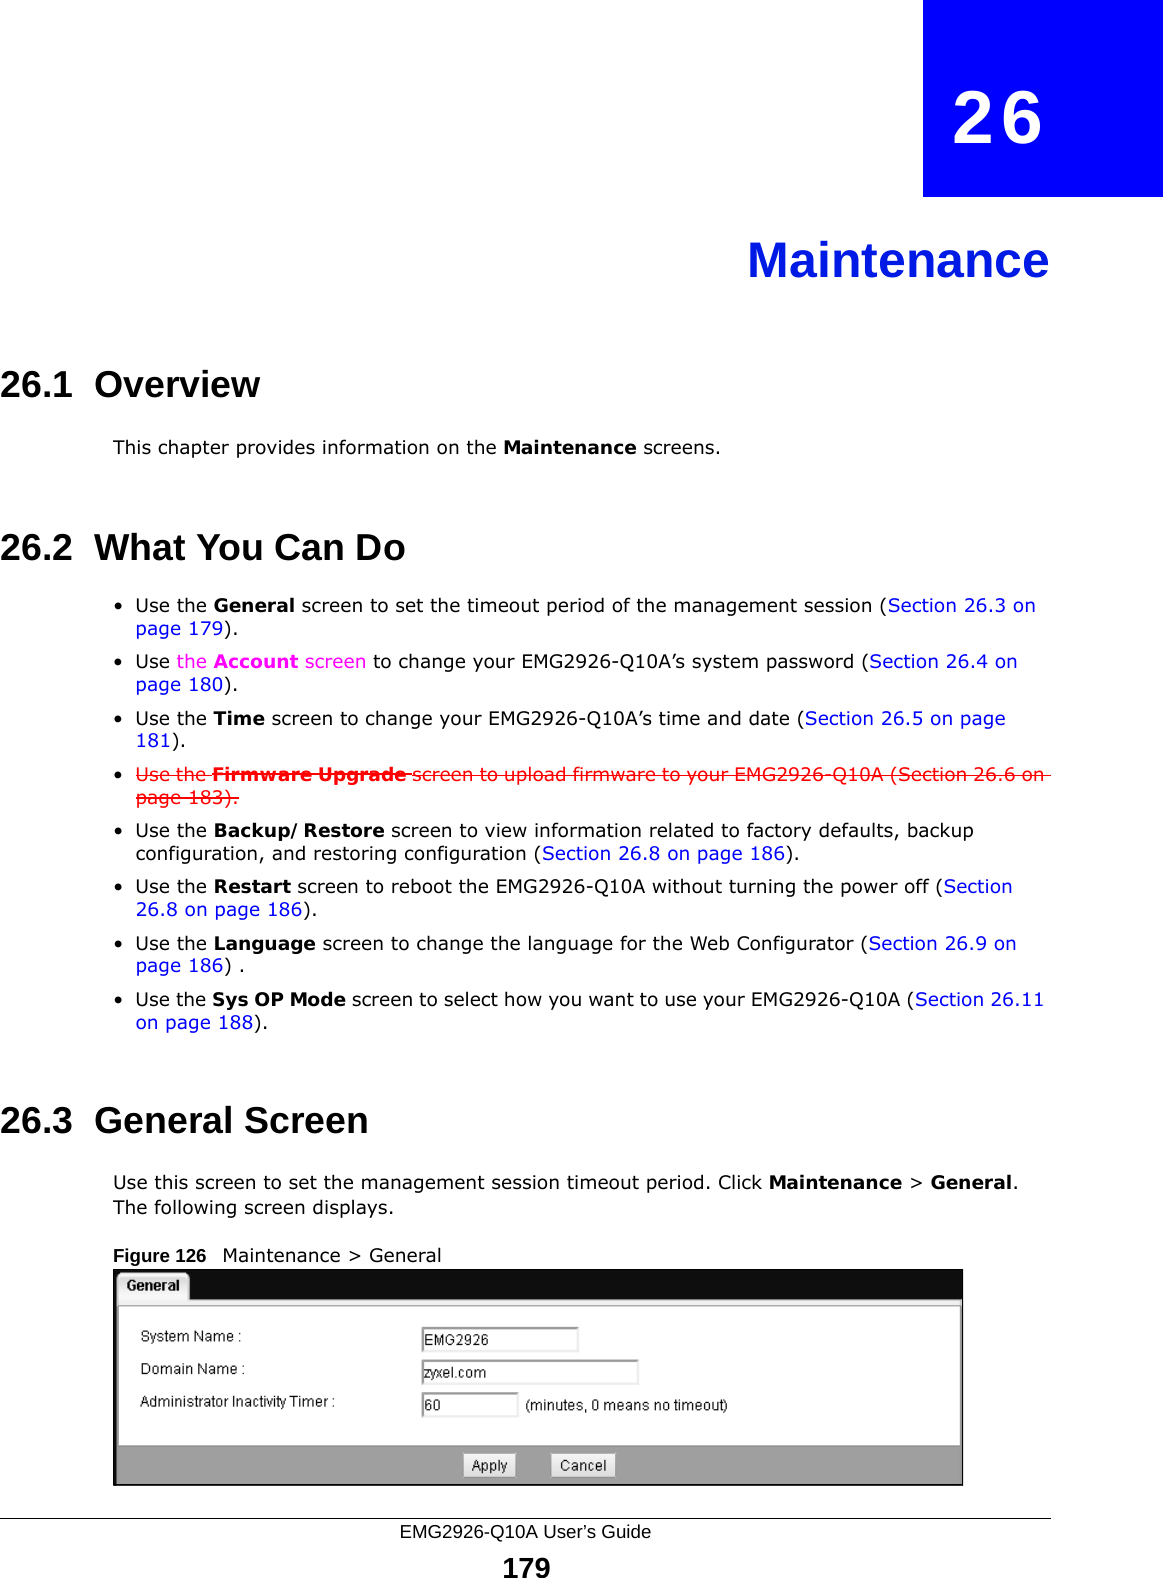 EMG2926-Q10A User’s Guide179CHAPTER   26Maintenance26.1  OverviewThis chapter provides information on the Maintenance screens. 26.2  What You Can Do•Use the General screen to set the timeout period of the management session (Section 26.3 on page 179). •Use the Account screen to change your EMG2926-Q10A’s system password (Section 26.4 on page 180).•Use the Time screen to change your EMG2926-Q10A’s time and date (Section 26.5 on page 181).•Use the Firmware Upgrade screen to upload firmware to your EMG2926-Q10A (Section 26.6 on page 183).•Use the Backup/Restore screen to view information related to factory defaults, backup configuration, and restoring configuration (Section 26.8 on page 186).•Use the Restart screen to reboot the EMG2926-Q10A without turning the power off (Section 26.8 on page 186).•Use the Language screen to change the language for the Web Configurator (Section 26.9 on page 186) .•Use the Sys OP Mode screen to select how you want to use your EMG2926-Q10A (Section 26.11 on page 188). 26.3  General Screen Use this screen to set the management session timeout period. Click Maintenance &gt; General. The following screen displays.Figure 126   Maintenance &gt; General 